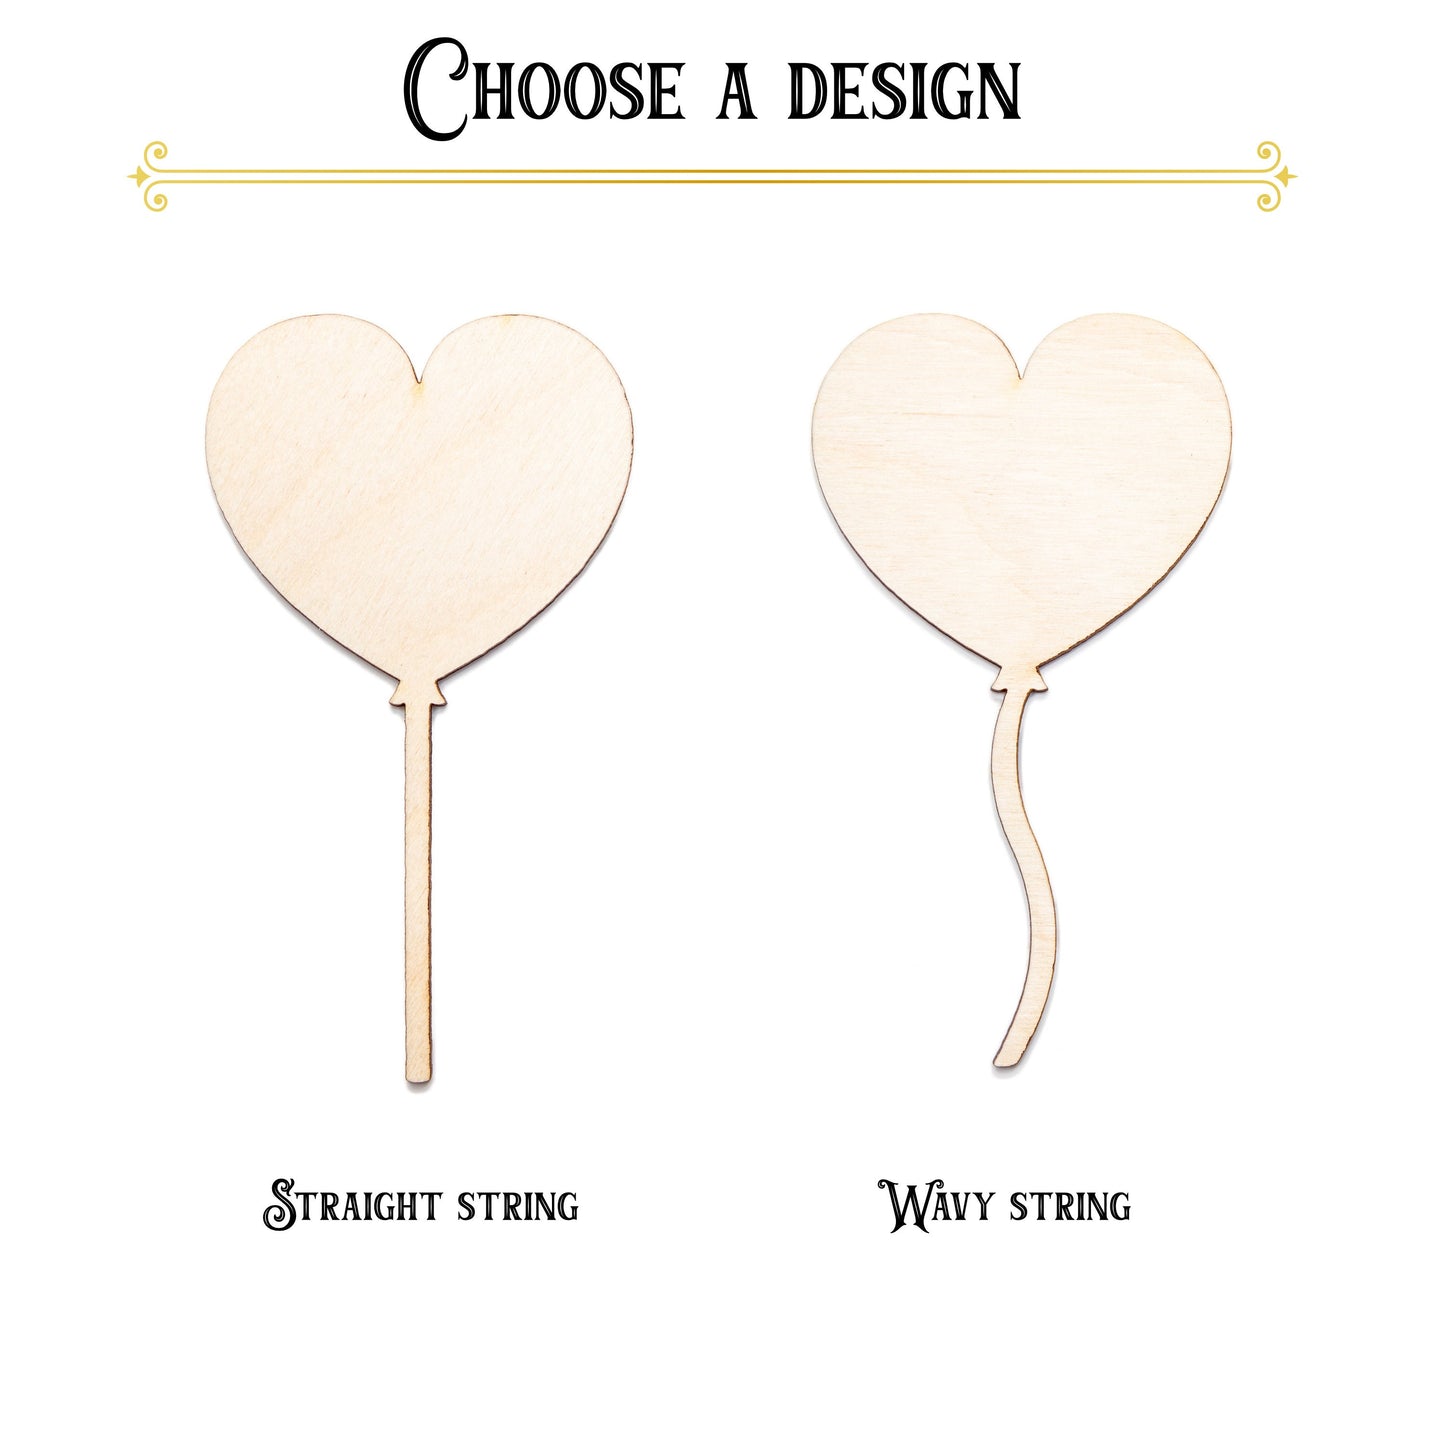 Balloon Heart With String-Wood Cutout-Two Design options-Party Balloon Sign Decor-Various Sizes-DIY Crafts-Party Favors-Balloon Theme Decor